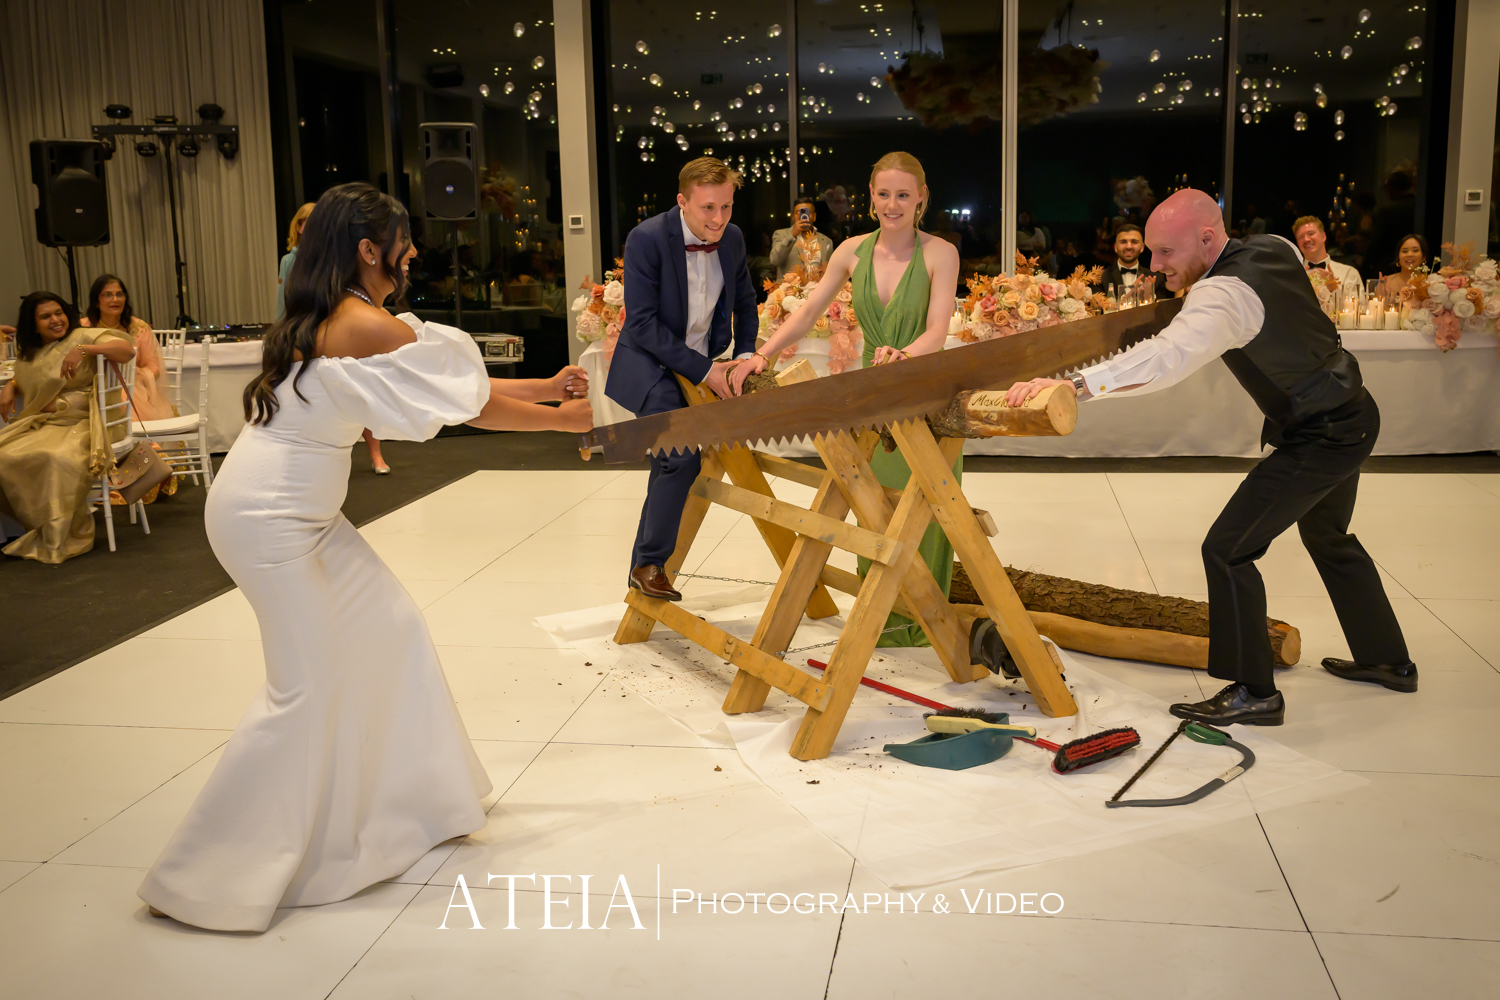 , Yasara and Max’s wedding photography at Marnong Estate Mickleham captured by ATEIA Photography &#038; Video